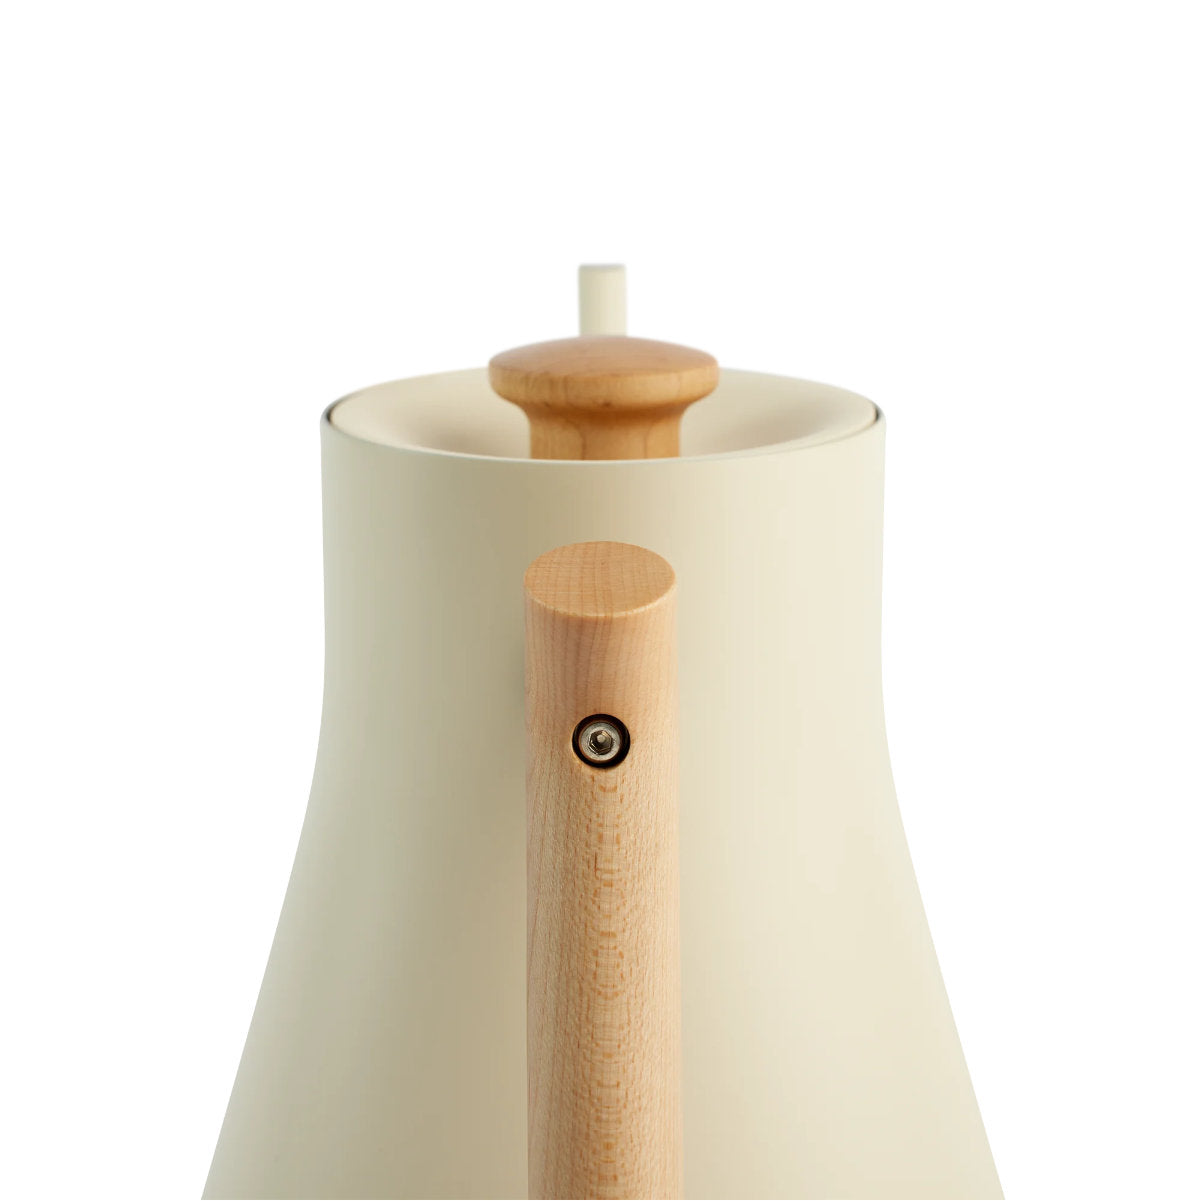 Fellow Stagg EKG Electric Pour-Over Kettle Cream + Maple